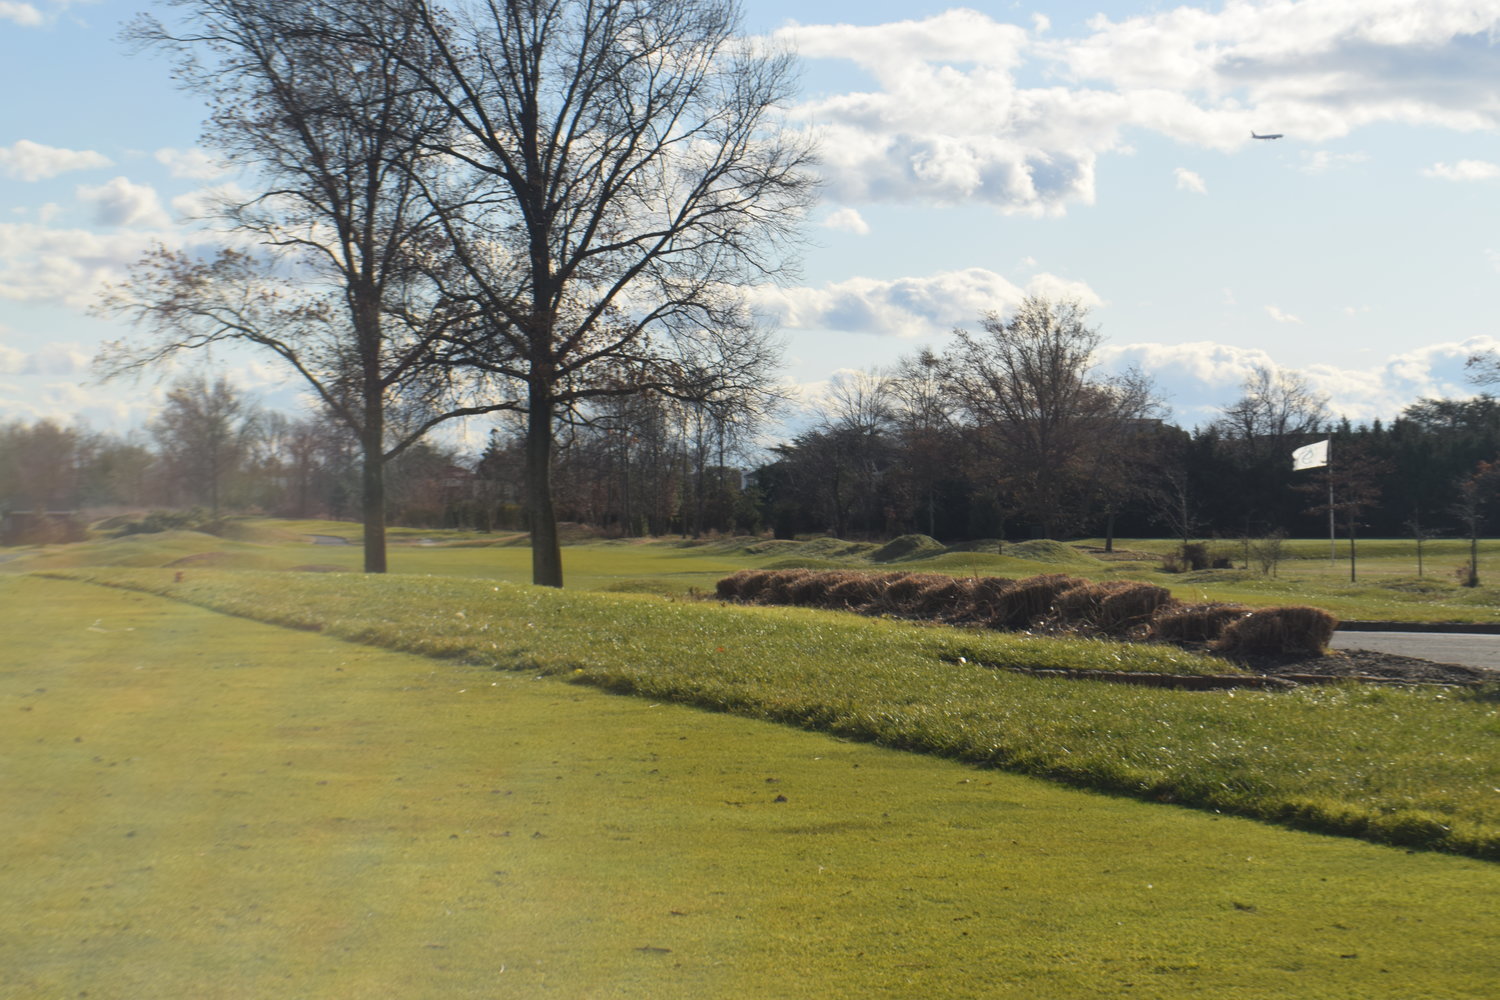 Seawane Country Club’s owners said that the influx of members from the Woodmere should help hasten the pace of upgrades — including to the golf course, above.